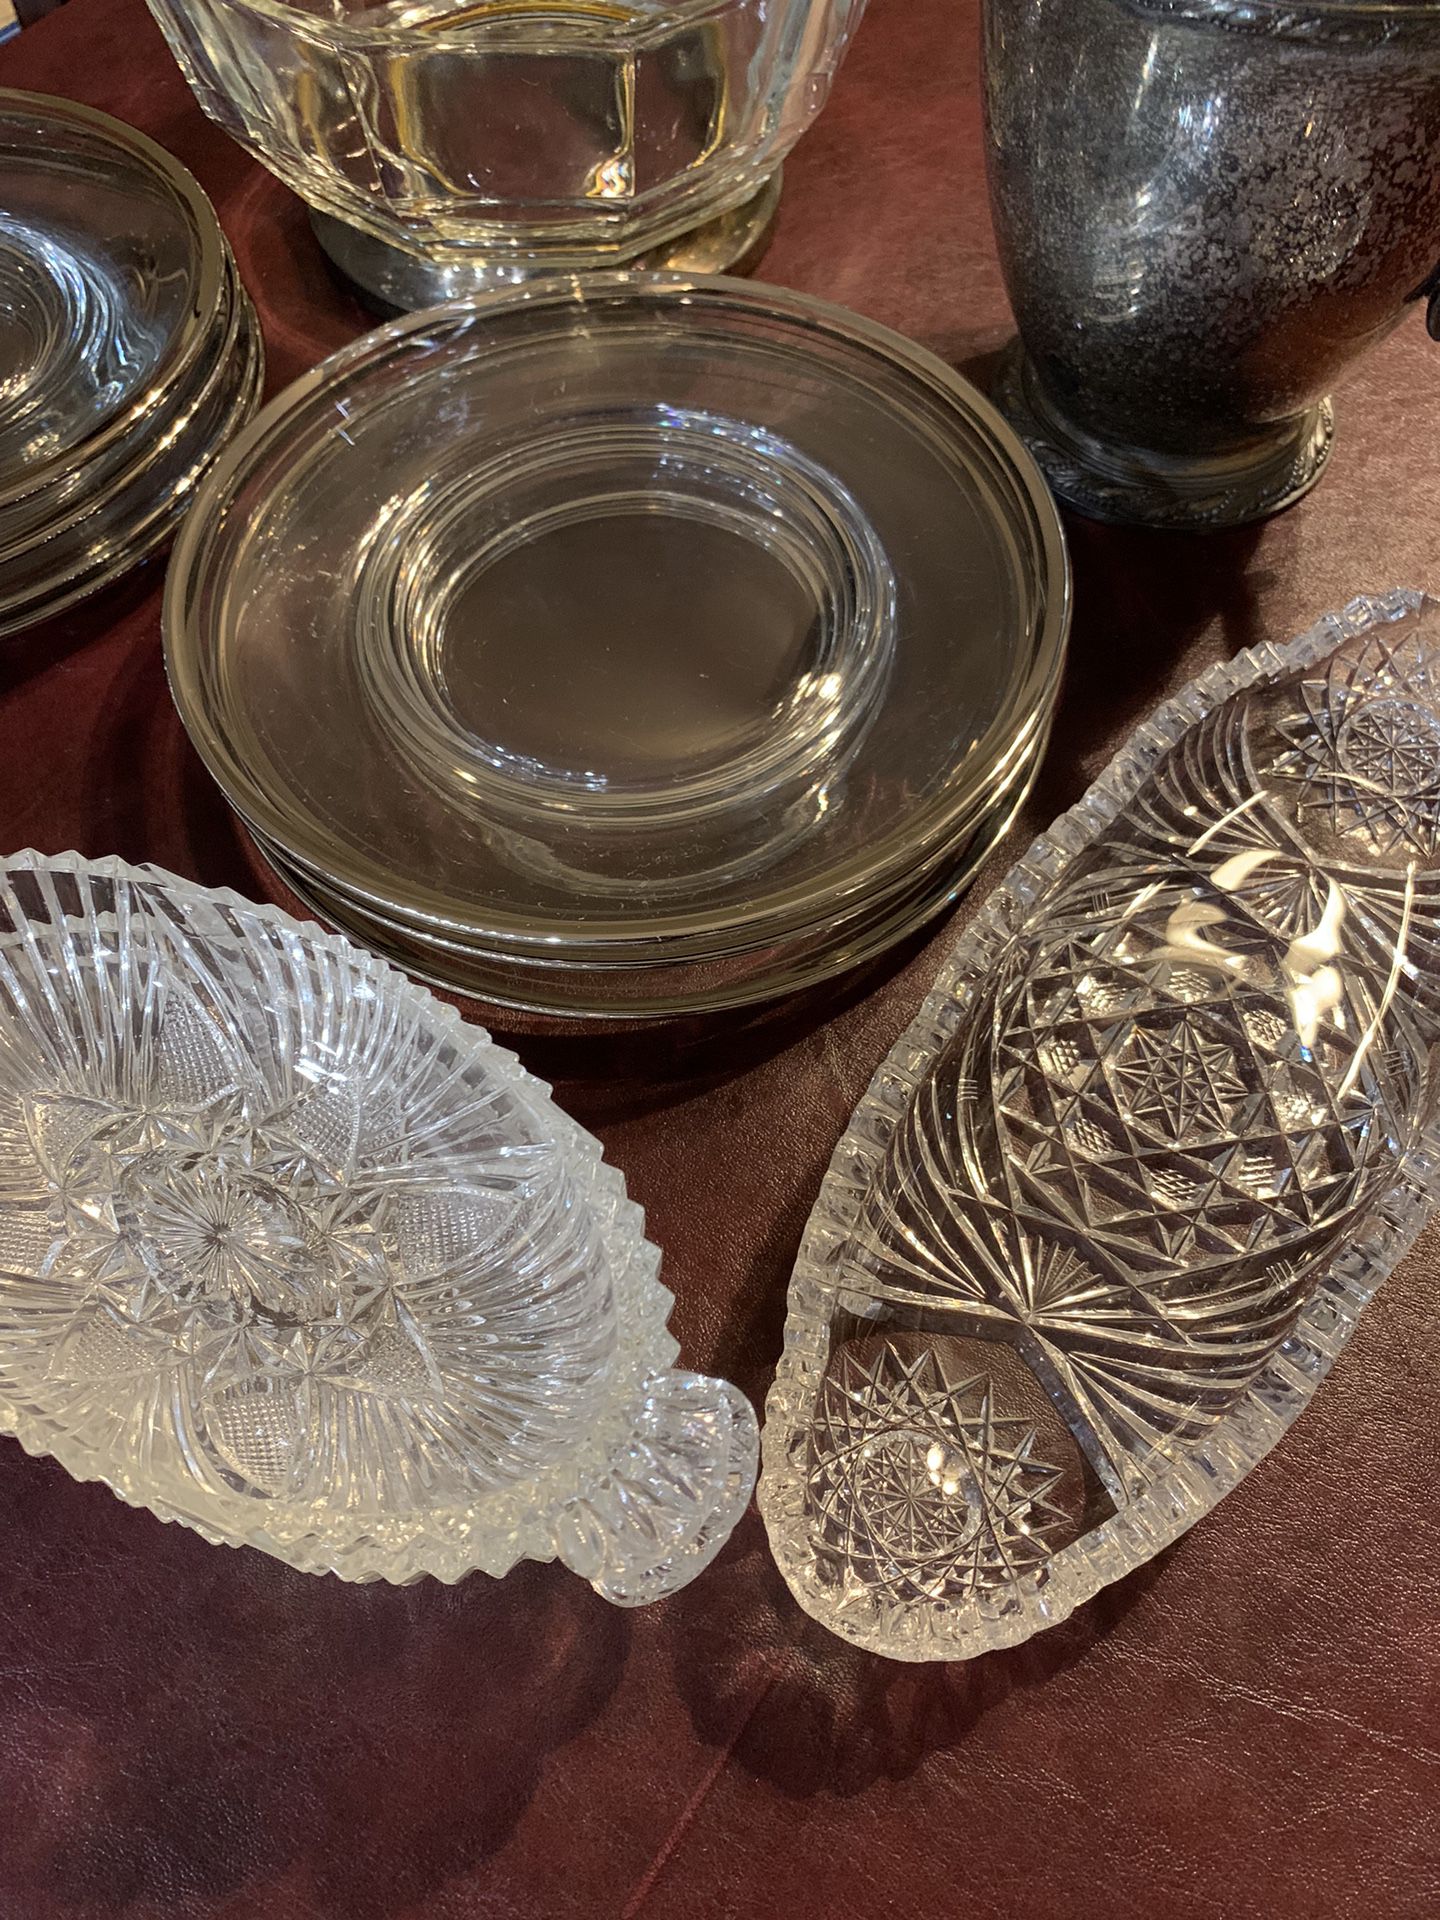 Fostoria 7 Crystal Trays, 8 Silver Plated Plates, 1 Silver Plated Fruit Bowl, (1 Silver Plated Pitcher Evandale WM Roger’s)